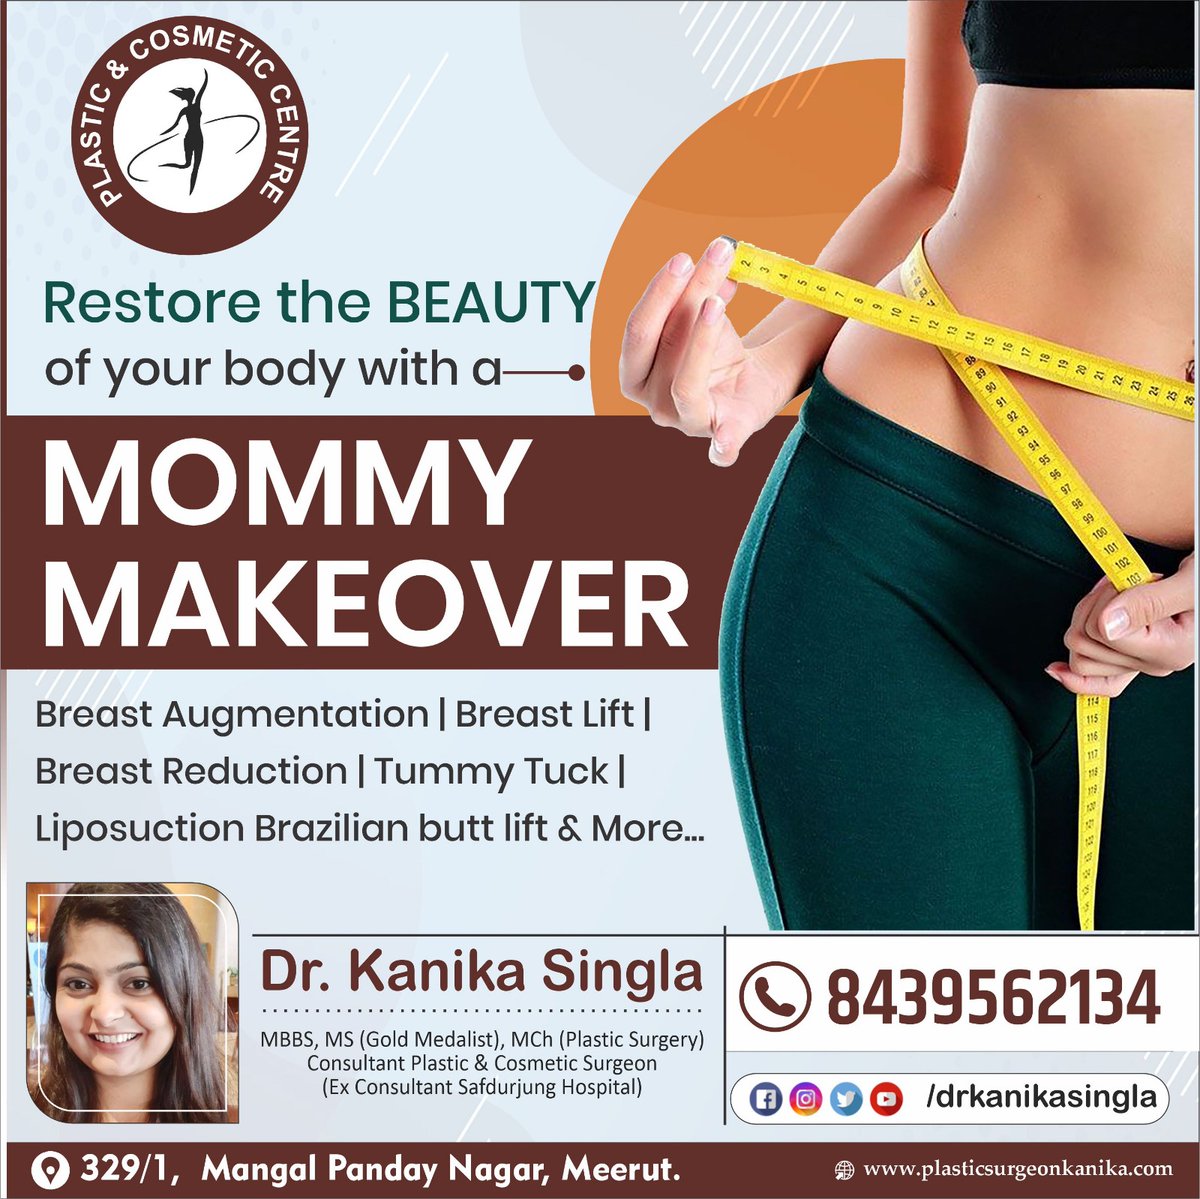 🌟💖🔥 Enhance Your Beauty 🔥💖🌟
Restore the BEAUTY of your body with a 𝐌𝐎𝐌𝐌𝐘 𝐌𝐀𝐊𝐄𝐎𝐕𝐄𝐑 
.
.
#BeautyEnhancement #BodyTransformation #CosmeticSurgery #ConfidenceBoost #MommyMakeover #LoveYourBody #SelfCare #EnhanceYourBeauty #SculptYourBody #LookYourBest #FeelGreat